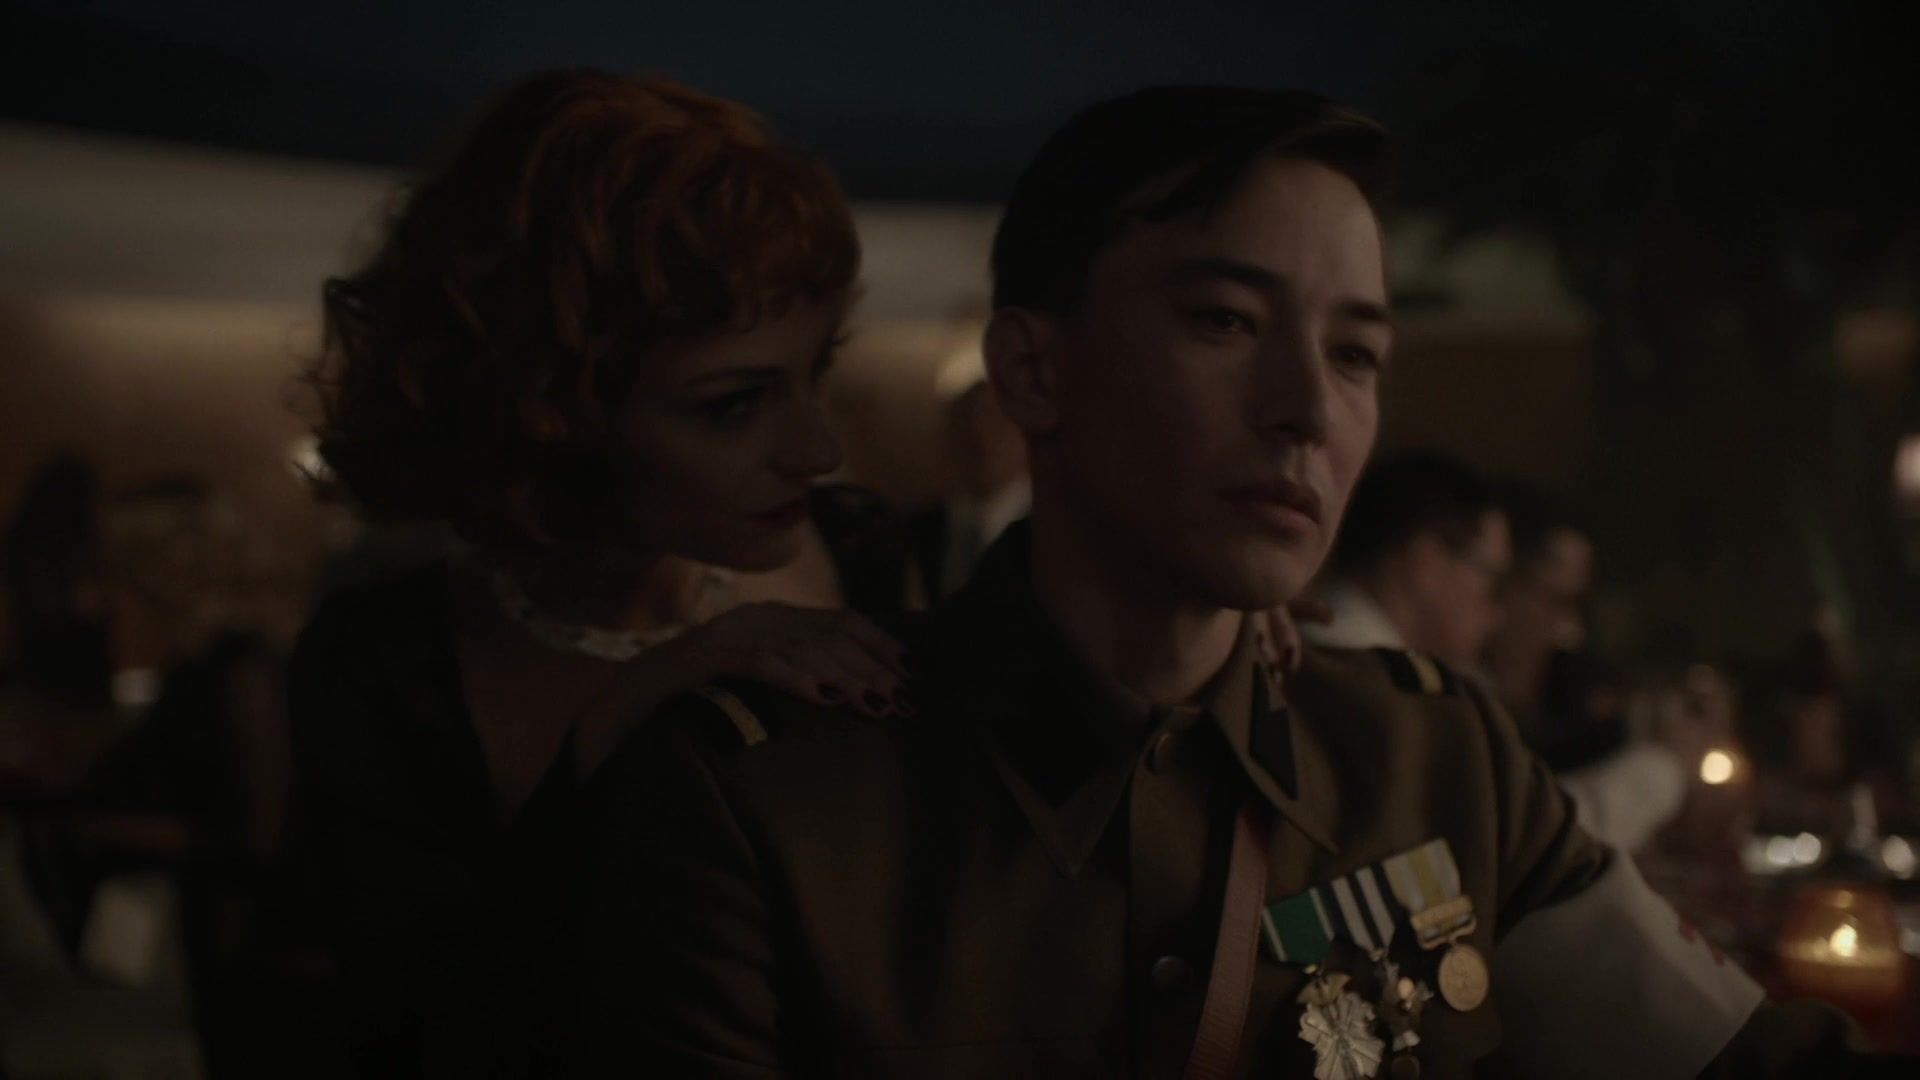 Punish Nude Destiny Millns - The Man in the High Castle s04e03 (2019) 3MOVS - 1